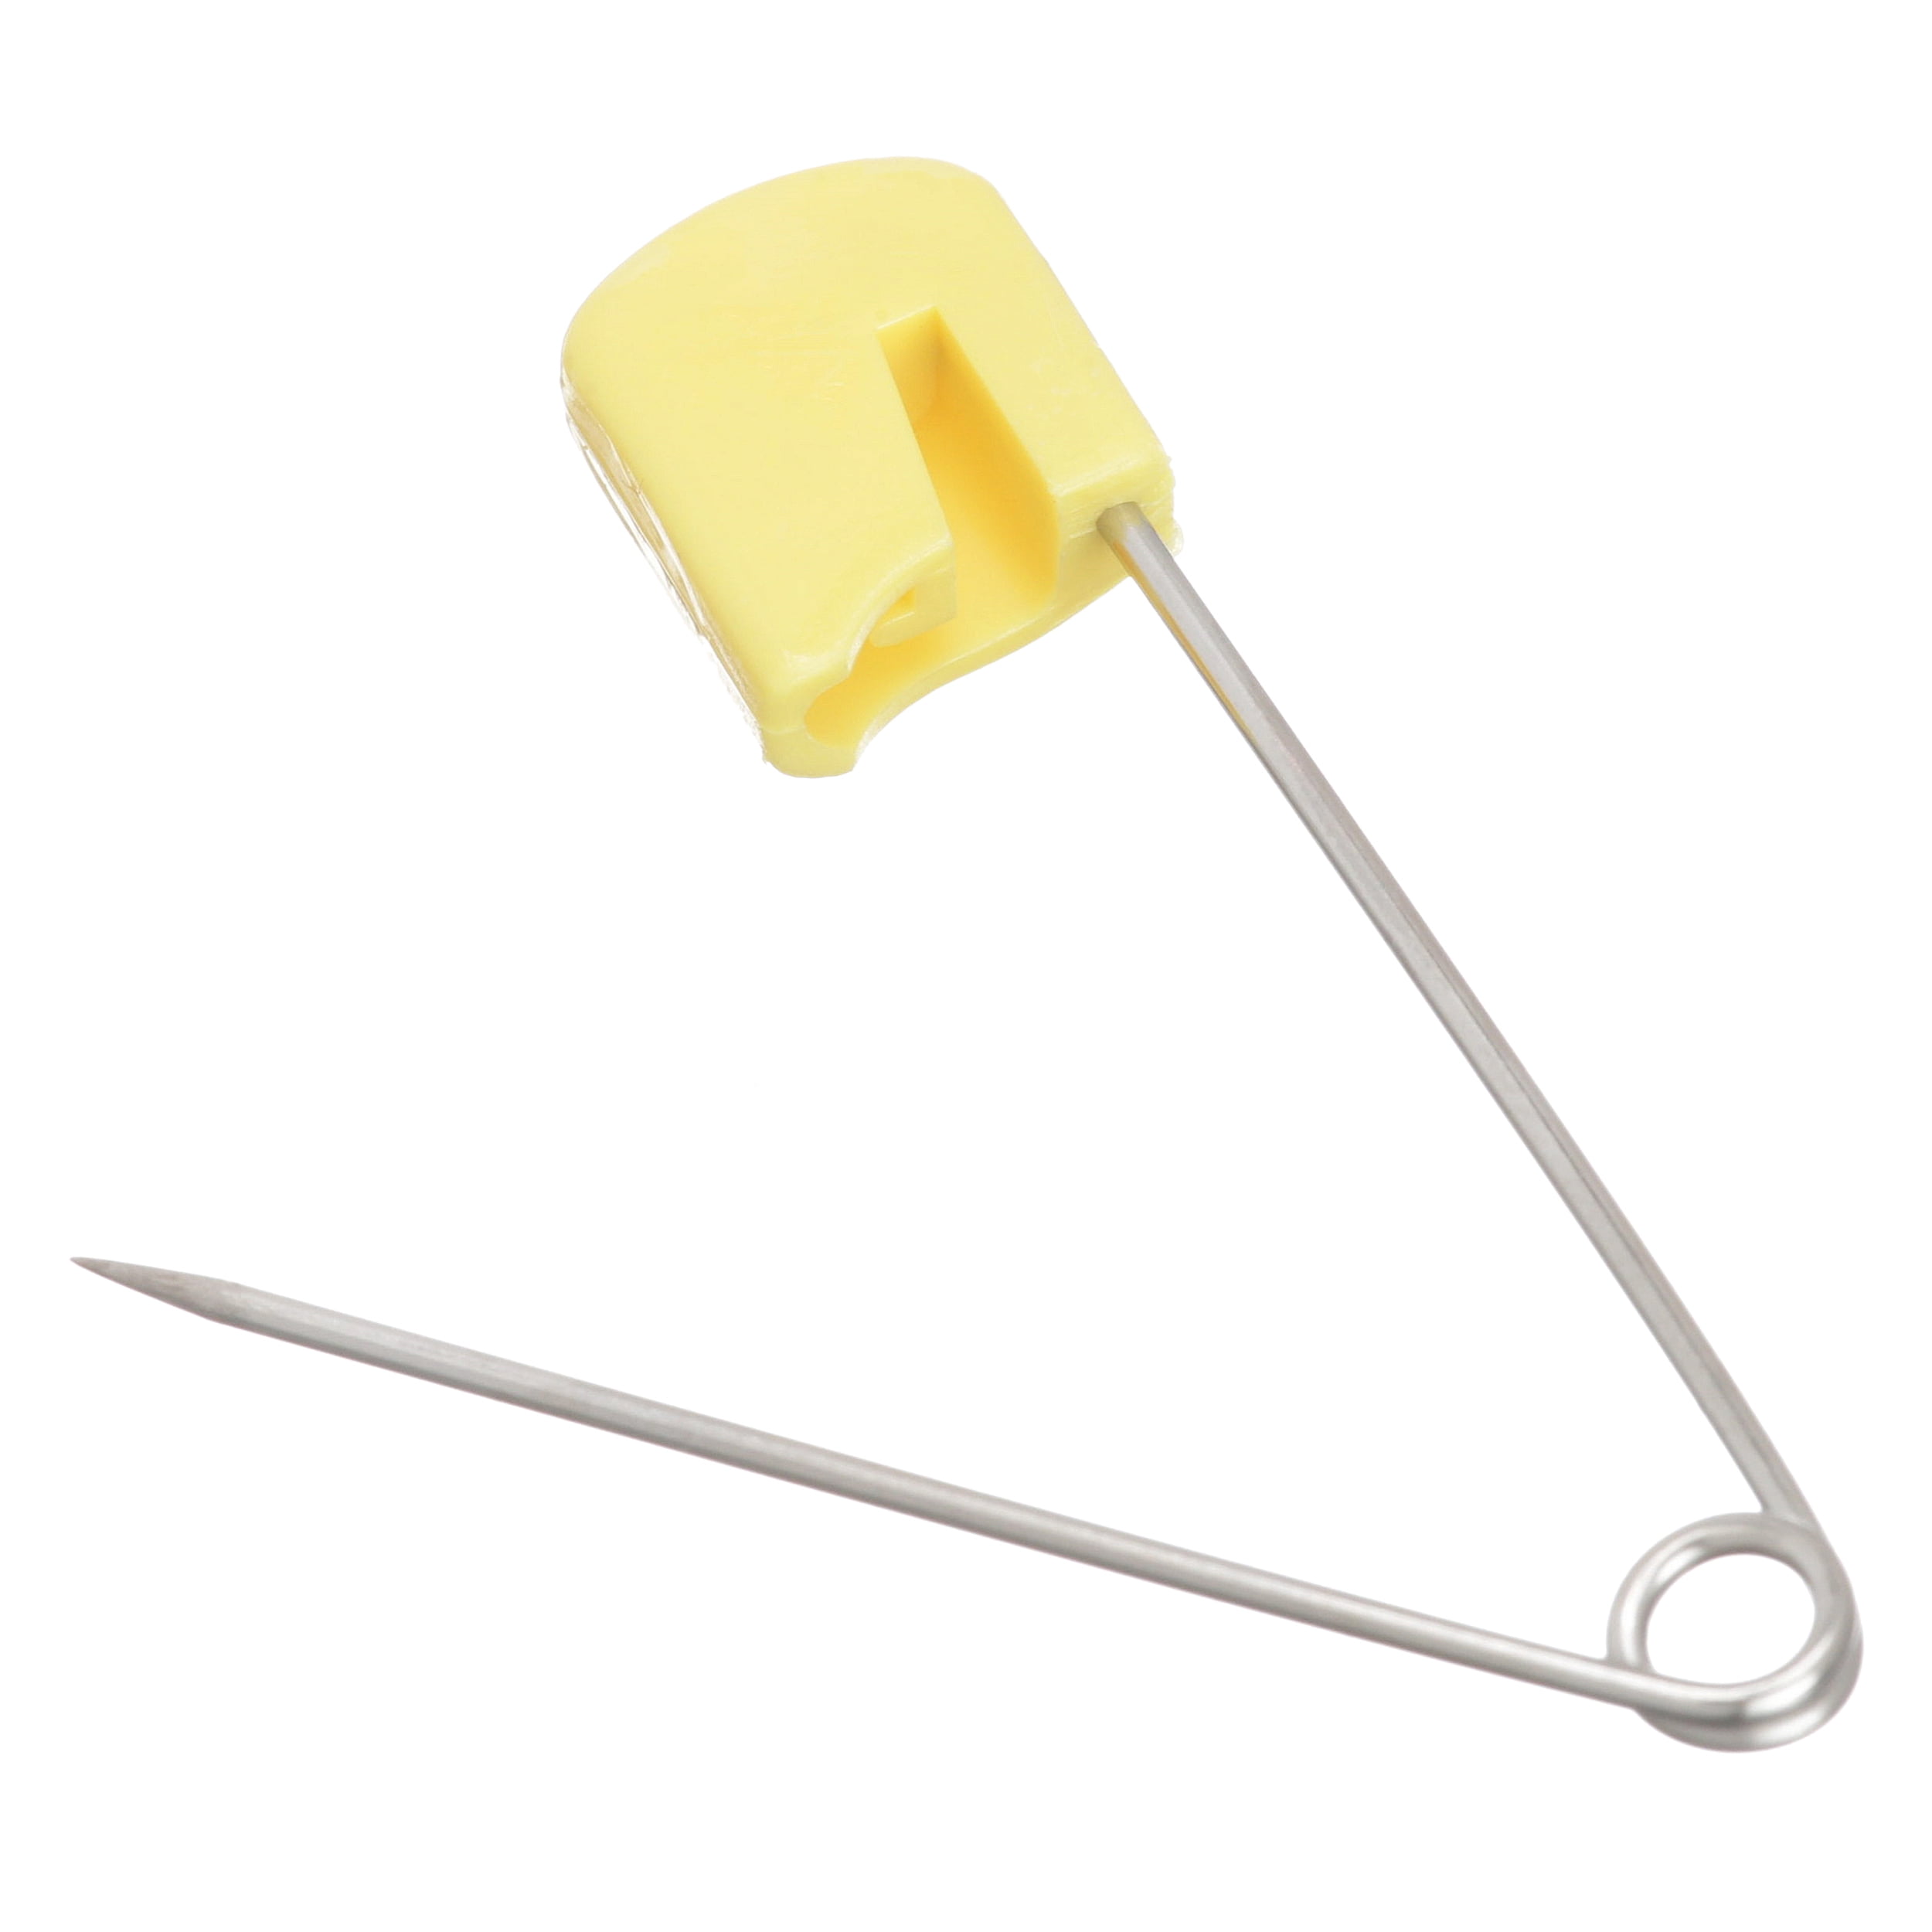 Diaper Pins Stainless Steel Traditional Safety Pin 50pcs Random Color, Size: 5.3cm/2.08in